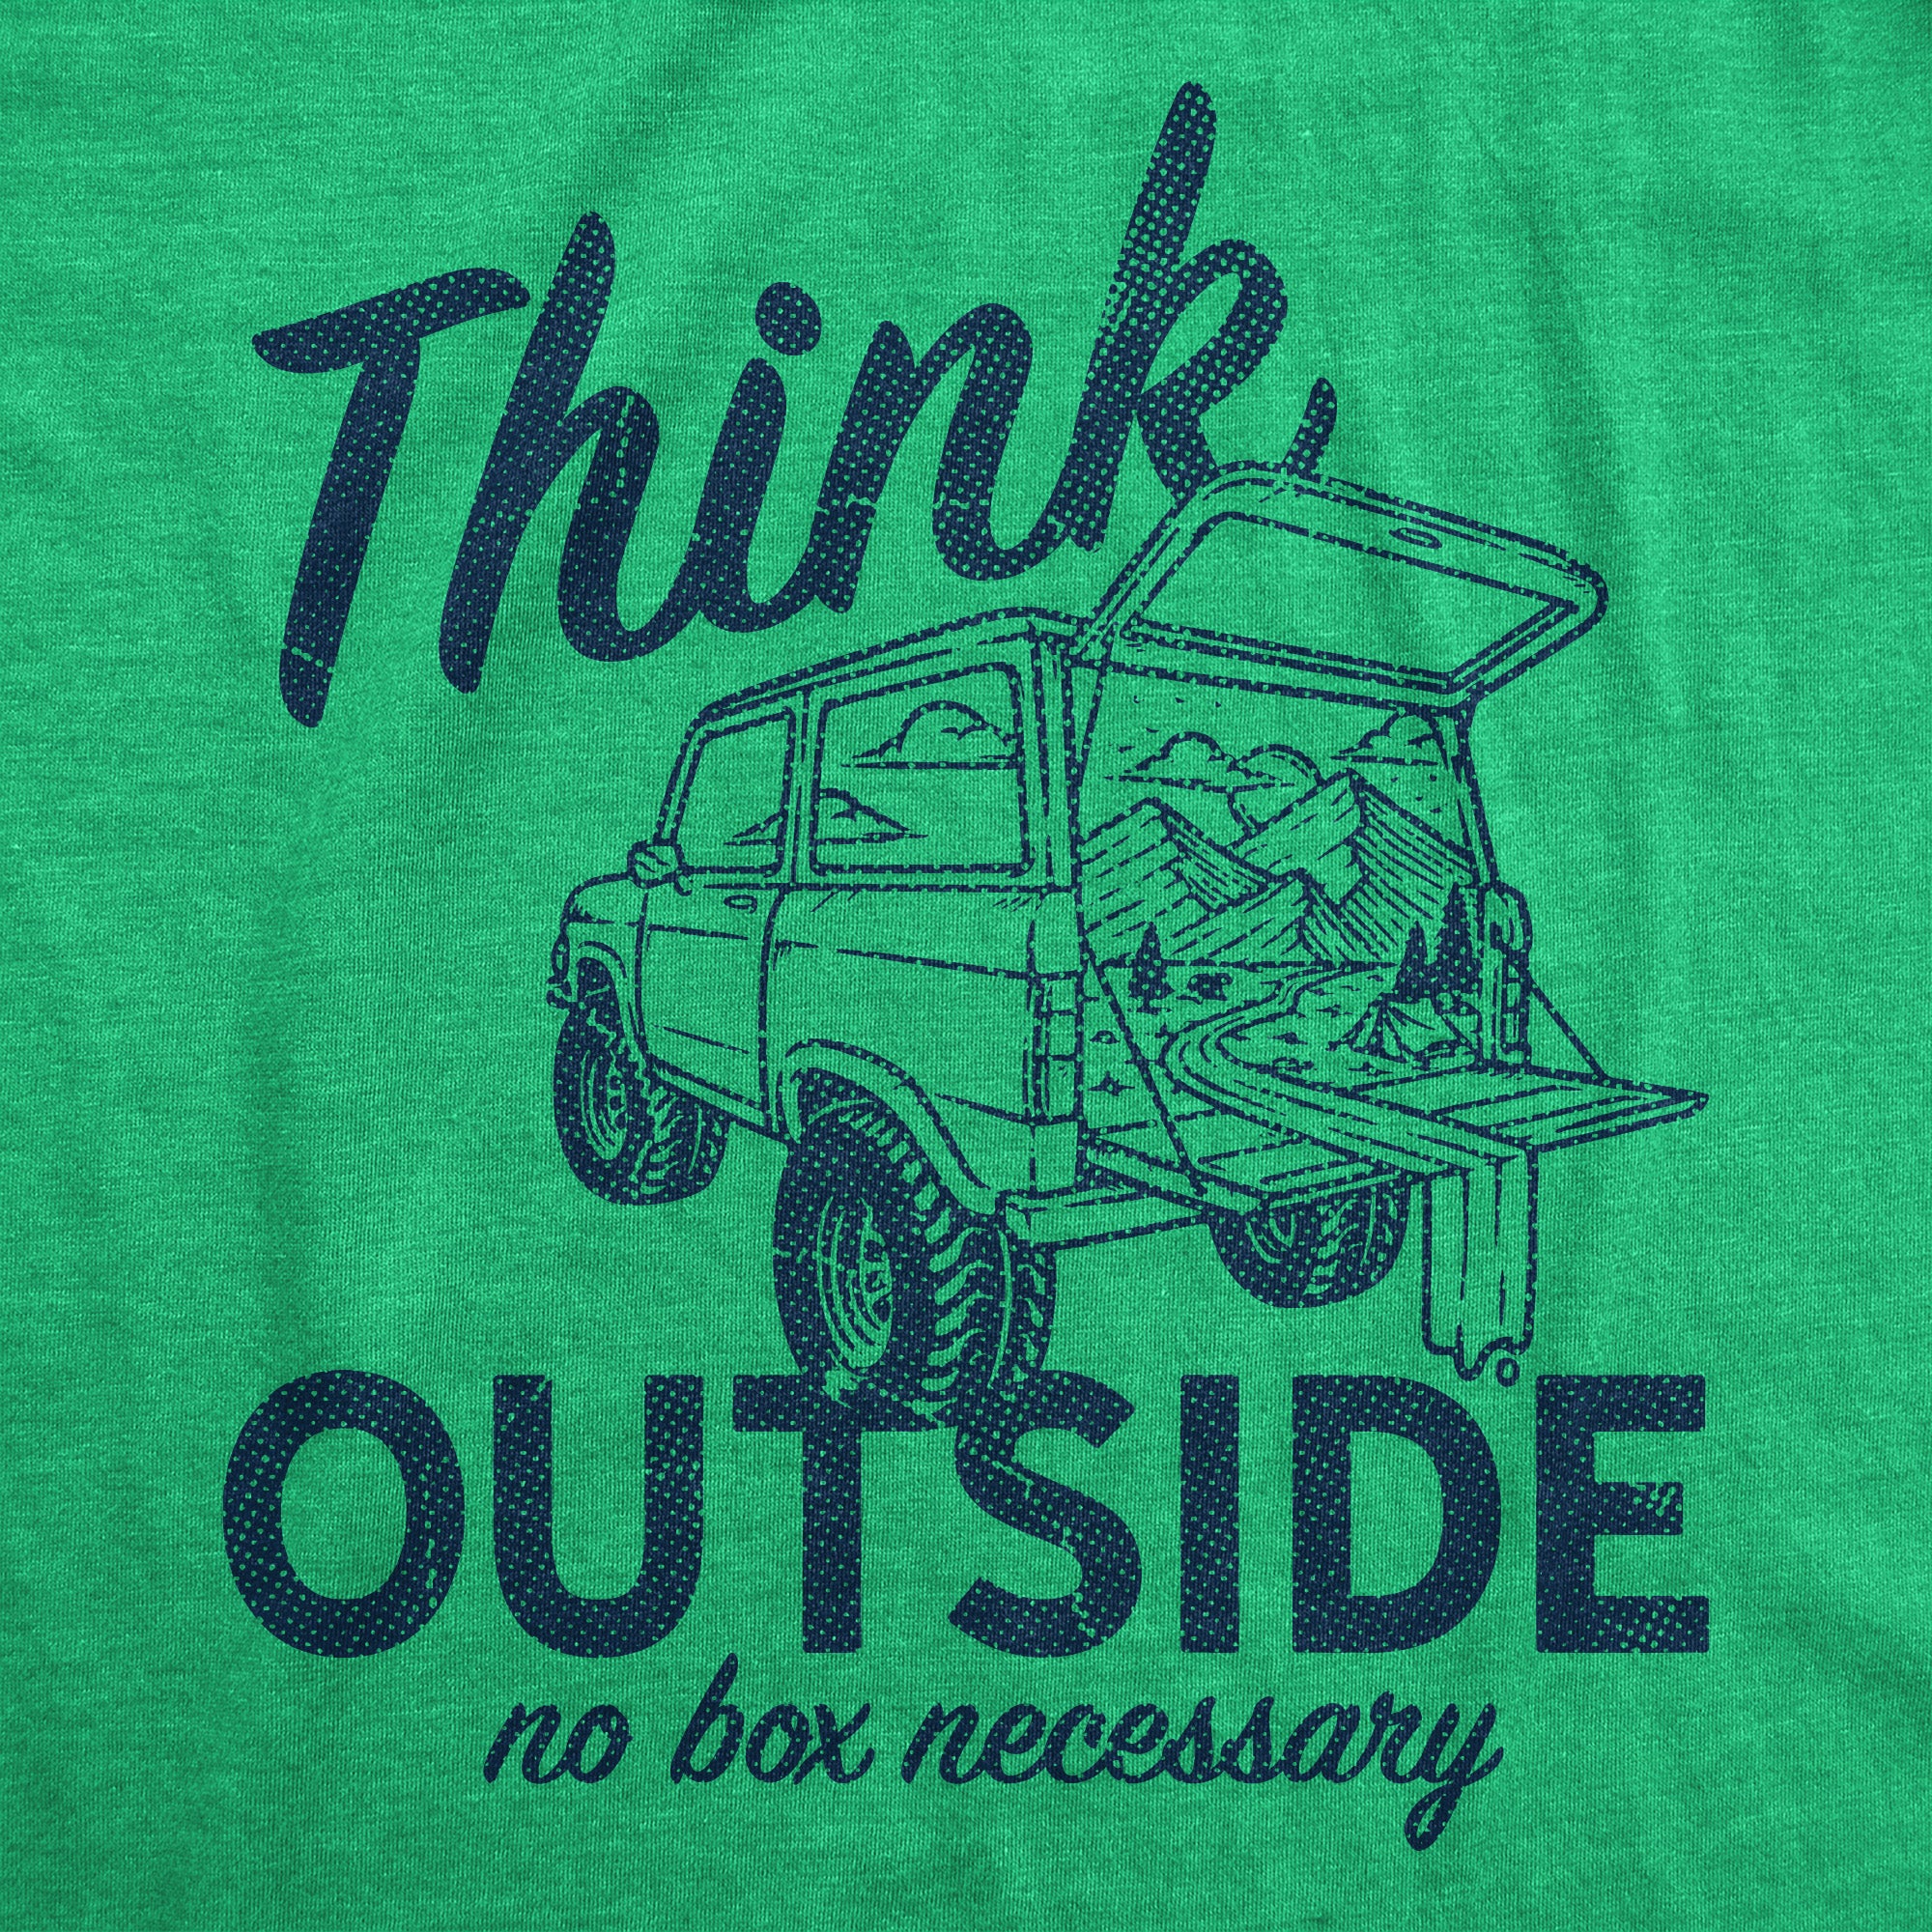 Funny Heather Green -OUTSIDE Think Outside Youth T Shirt Nerdy Camping Tee